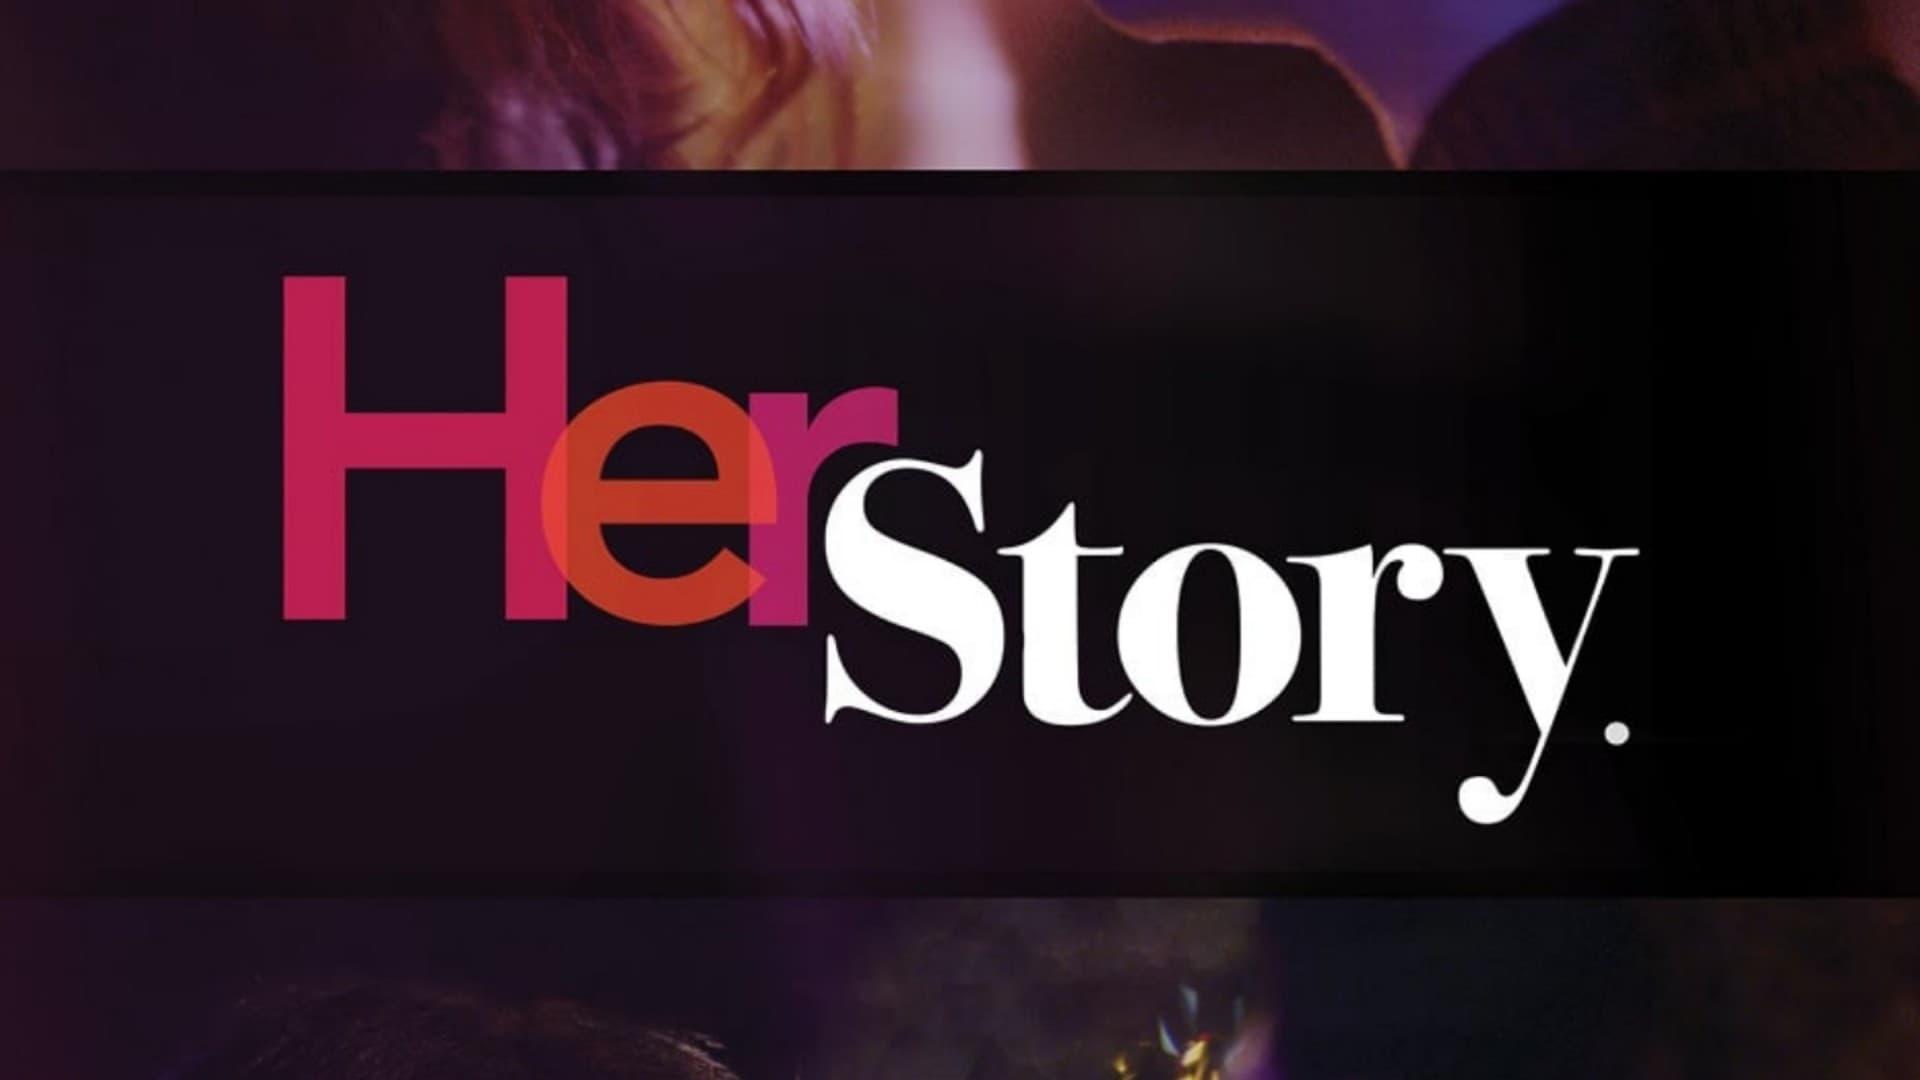 Her Story backdrop